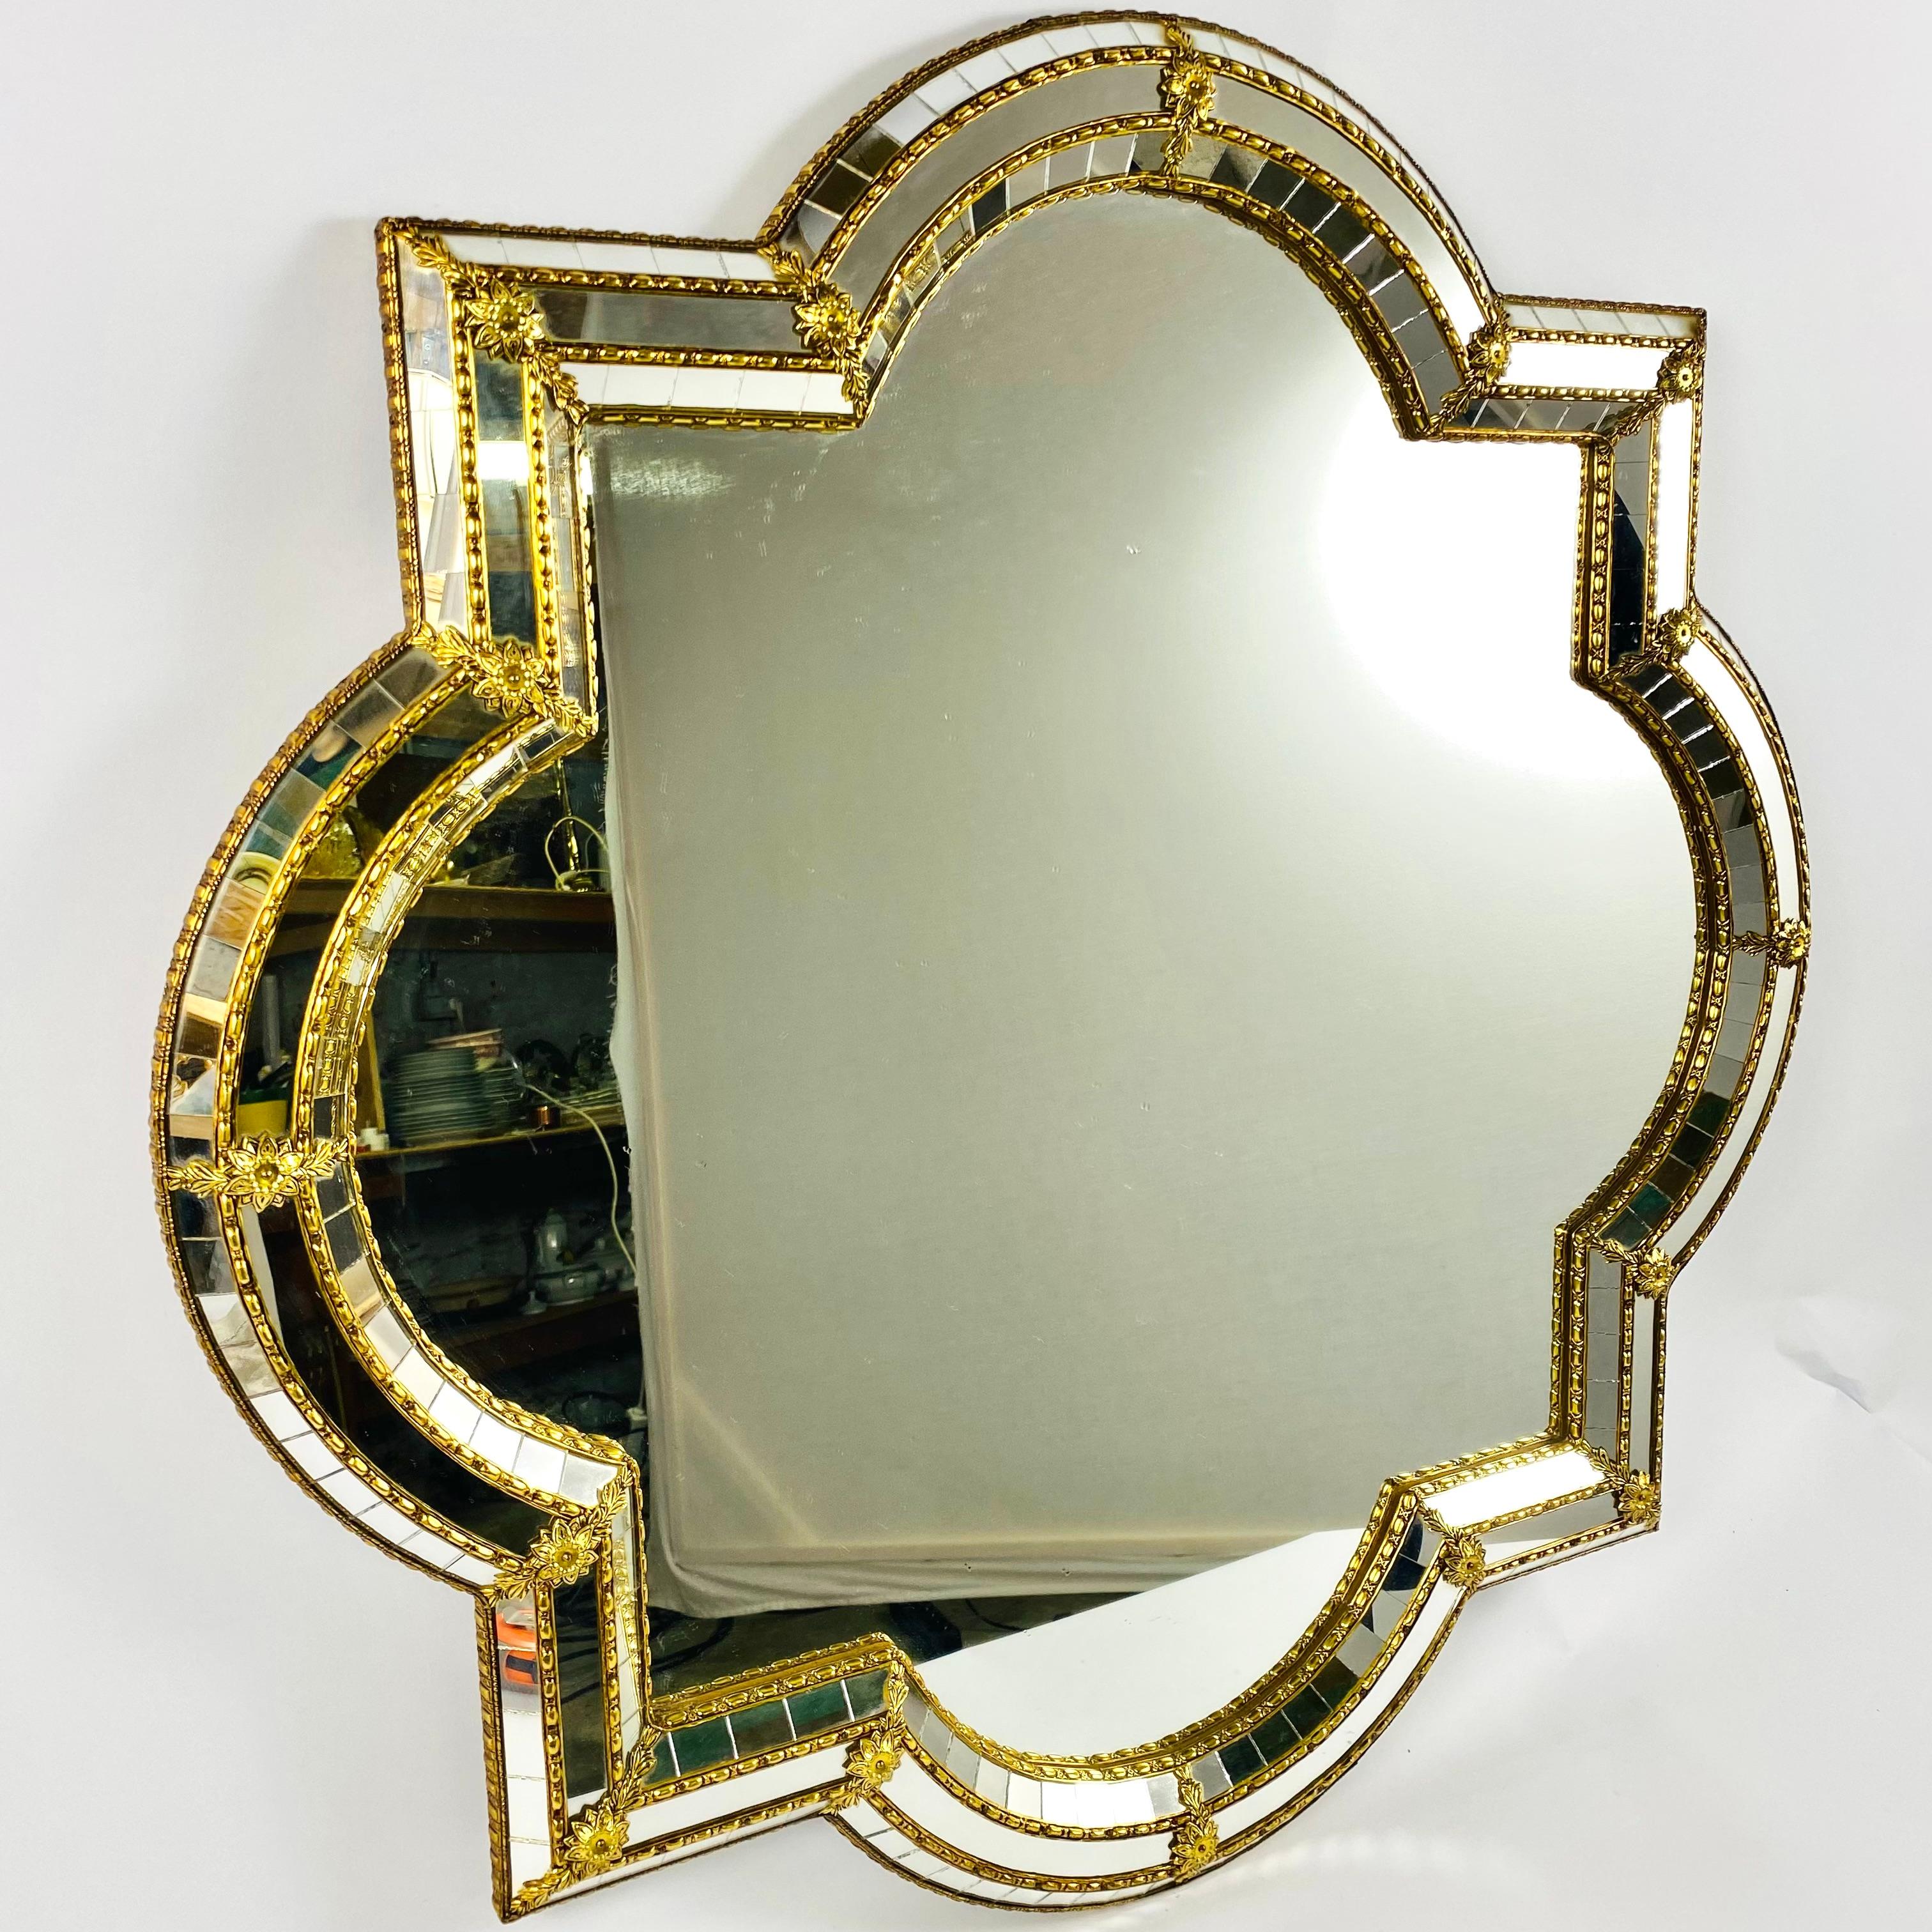 Beautiful handmade Venetian oval / square mirror from Italy, Florence 1970s.

The frame has cut glass panes across the entire width, which is held together by a brass strip.

The trapezoidal mirror has a brass flower at each corner.

The special